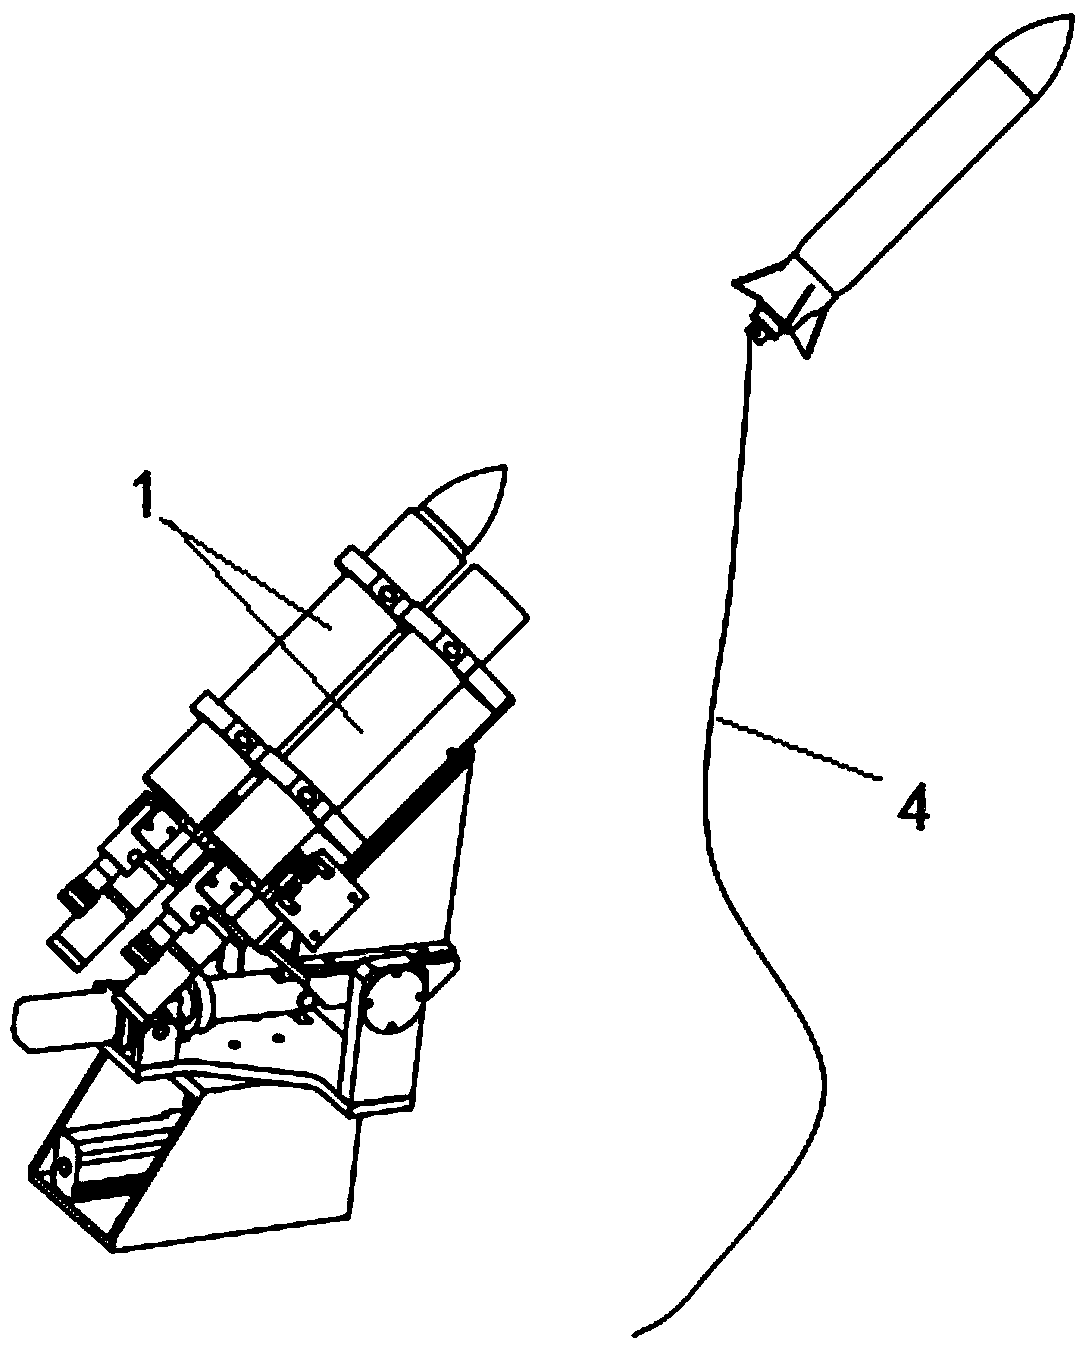 A projecting device for the recovery stage of an unmanned vessel